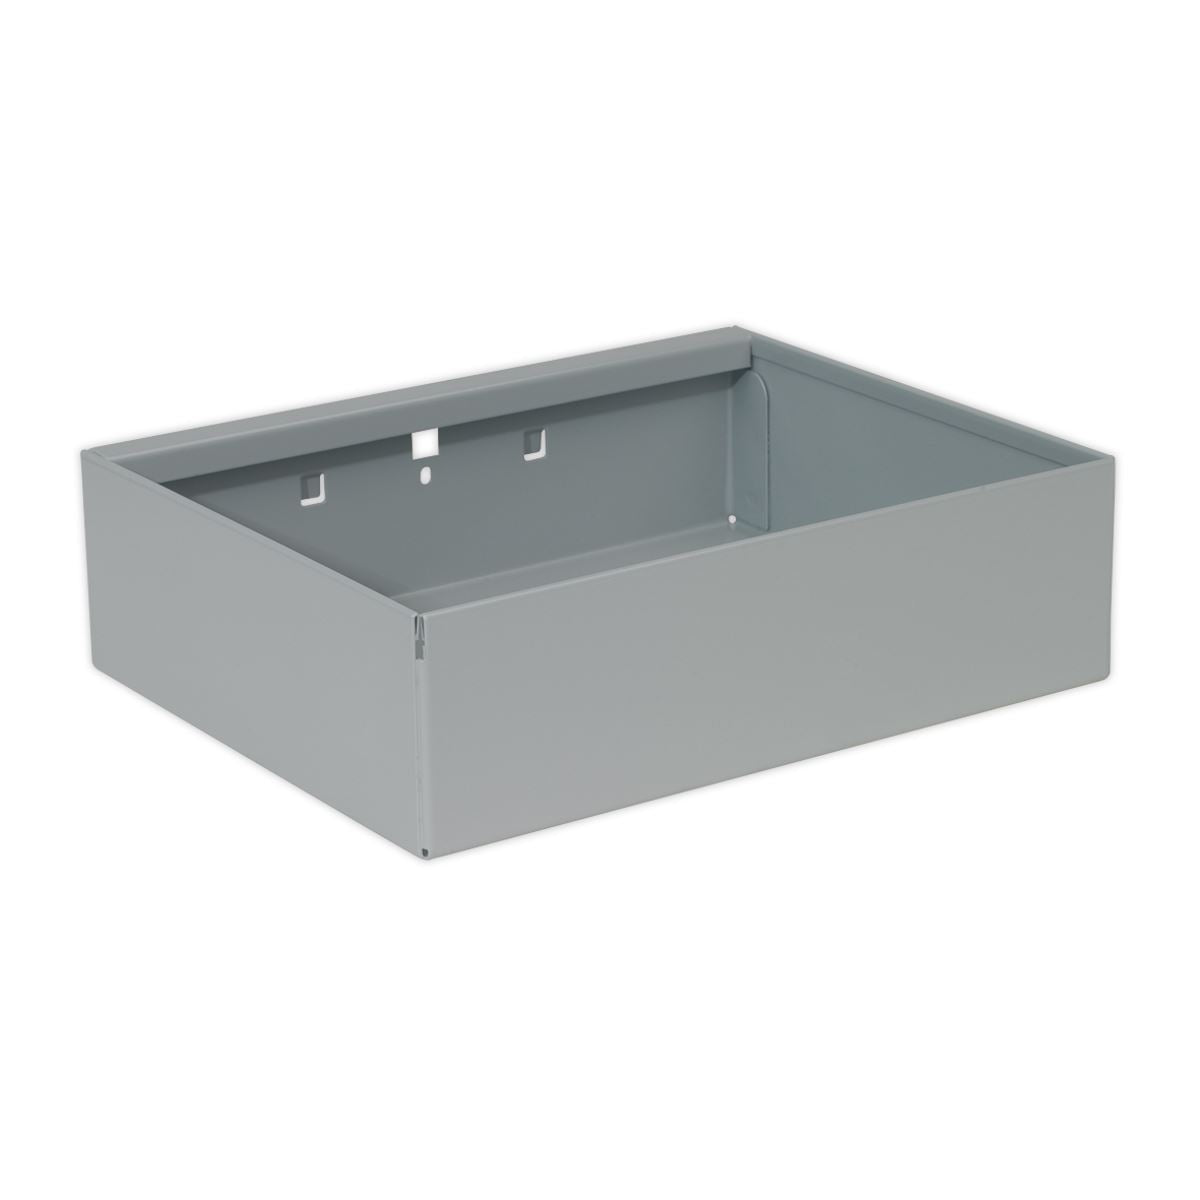 Sealey Storage Tray for PerfoTool/Wall Panels 225 x 175 x 65mm